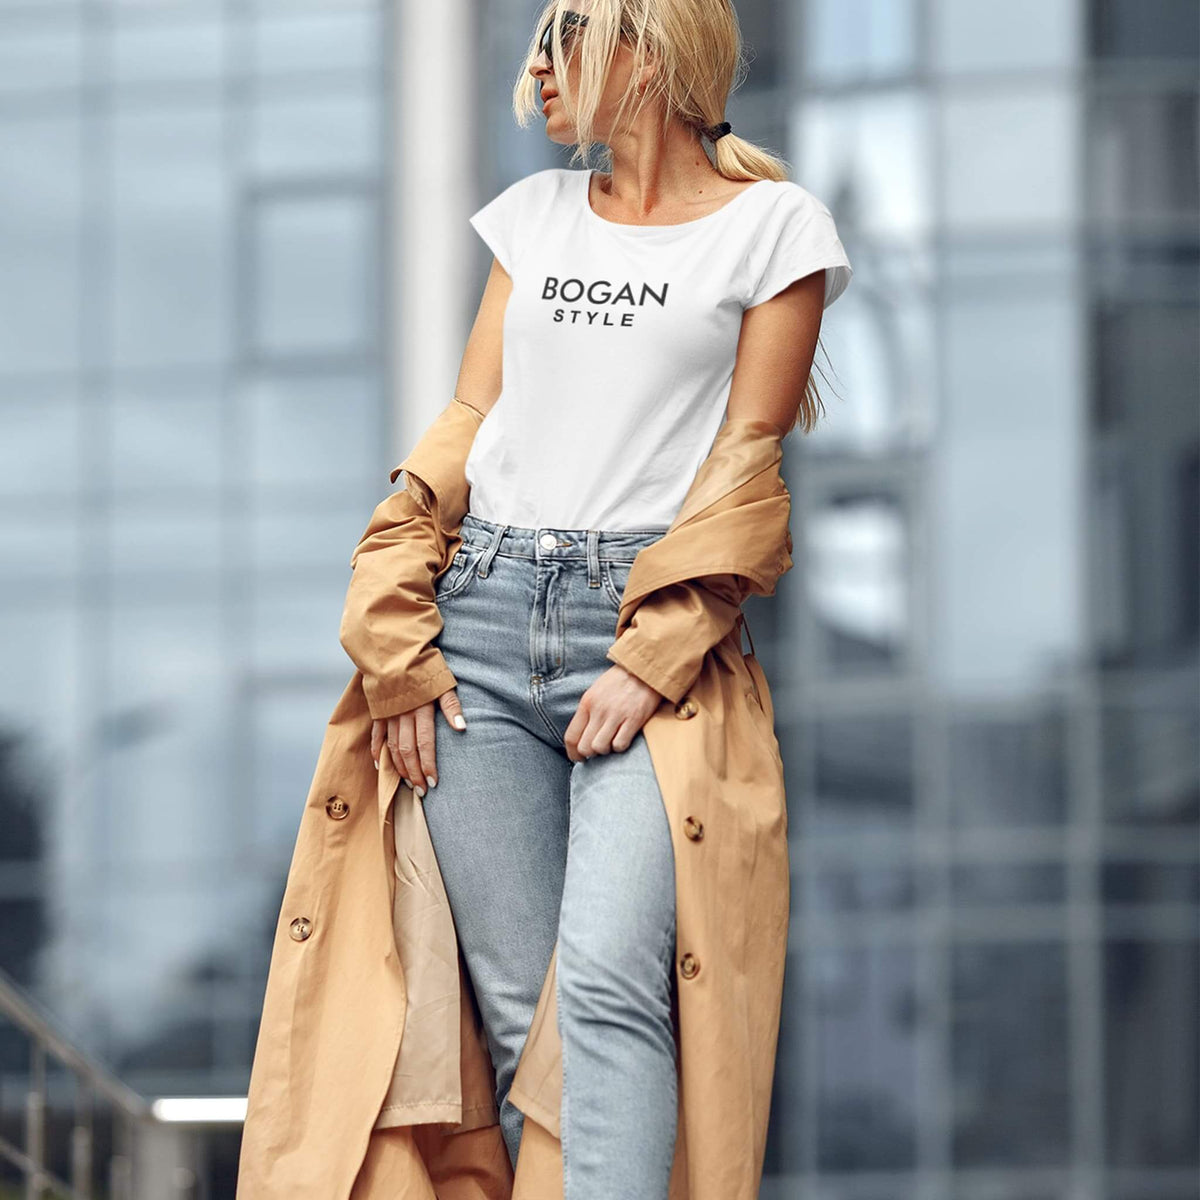 Woman posing in the city wearing white Bogan Style t shirt